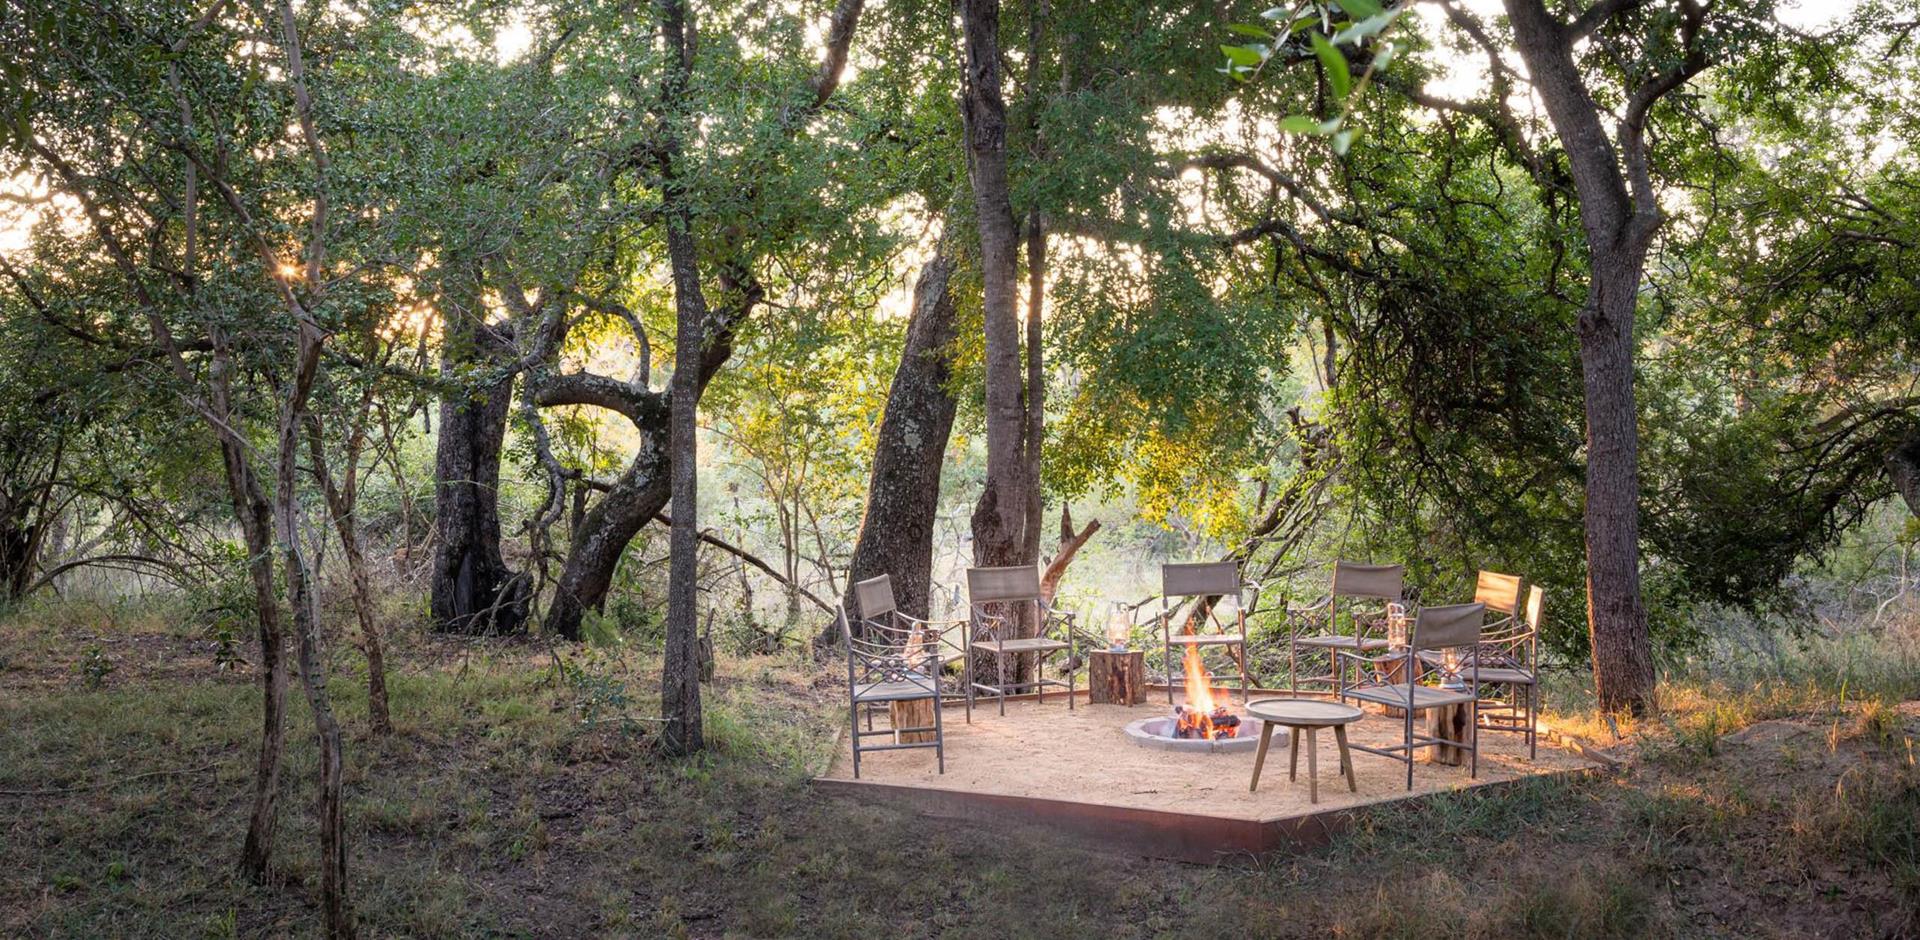 Firepit seating, Waterside at Royal Malewane, Greater Kruger National Park. South Africa